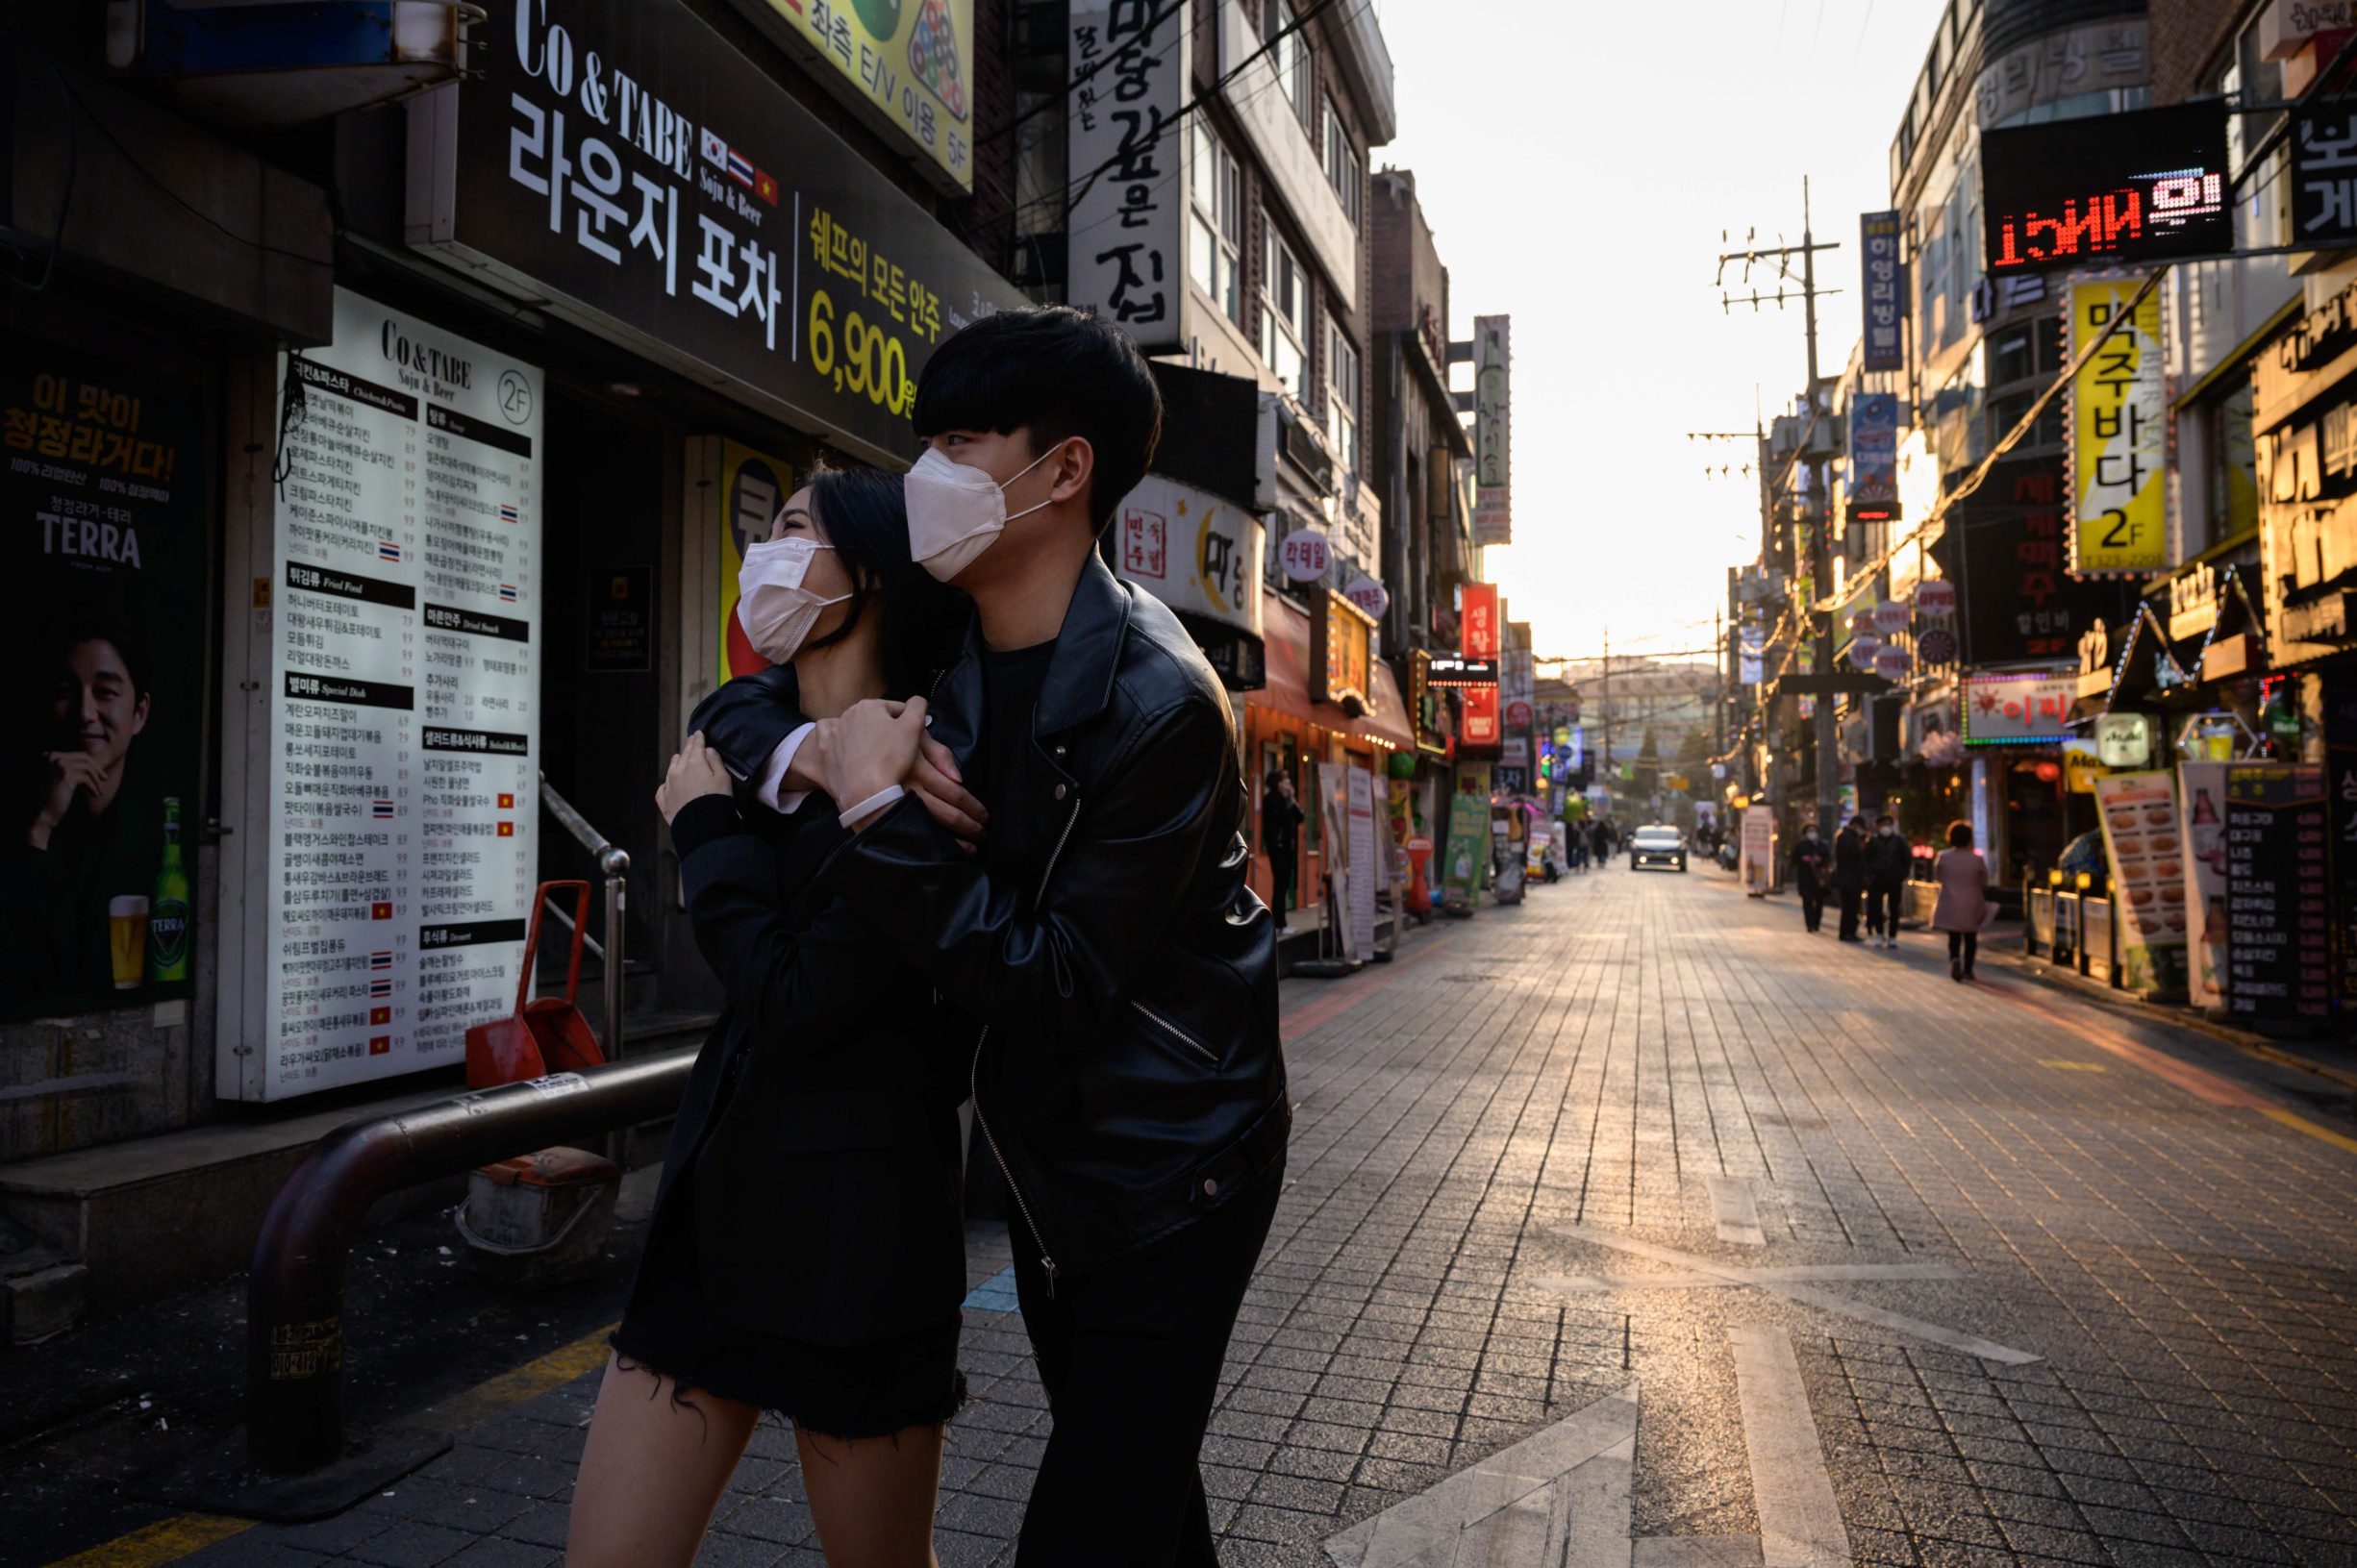 People wearing face masks amid concerns over the COVID-19 novel coronavirus, walk through an alleyway in Seoul on Marh 24, 2020. (Photo by Ed JONES / AFP)